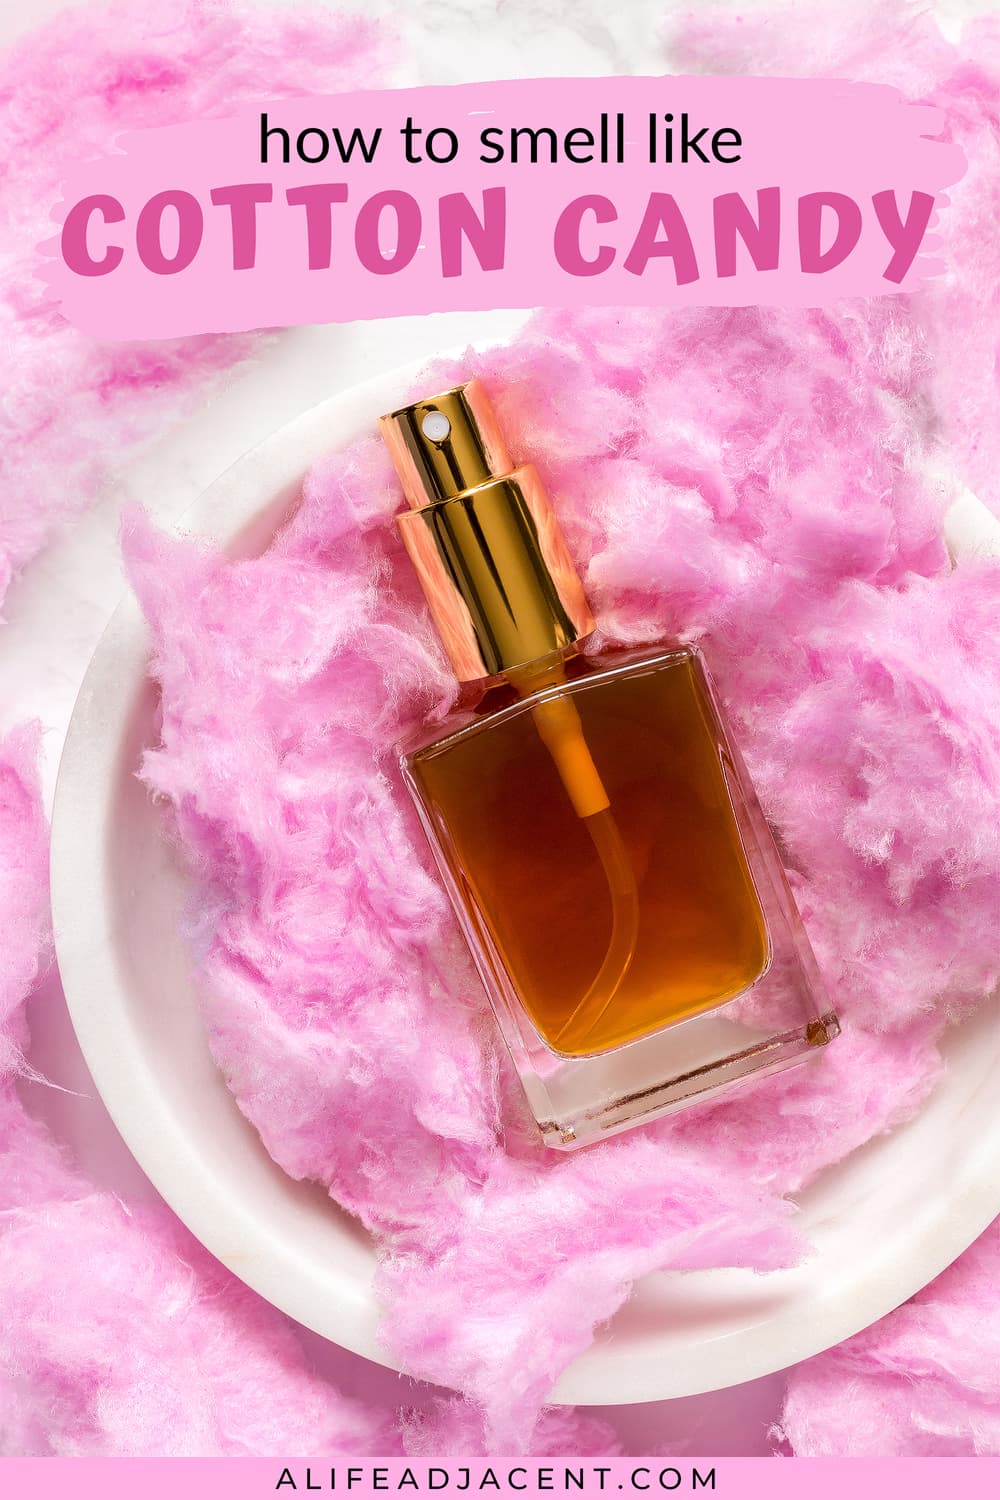 https://alifeadjacent.com/wp-content/uploads/2022/06/how-to-smell-like-cotton-candy-perfume.jpg